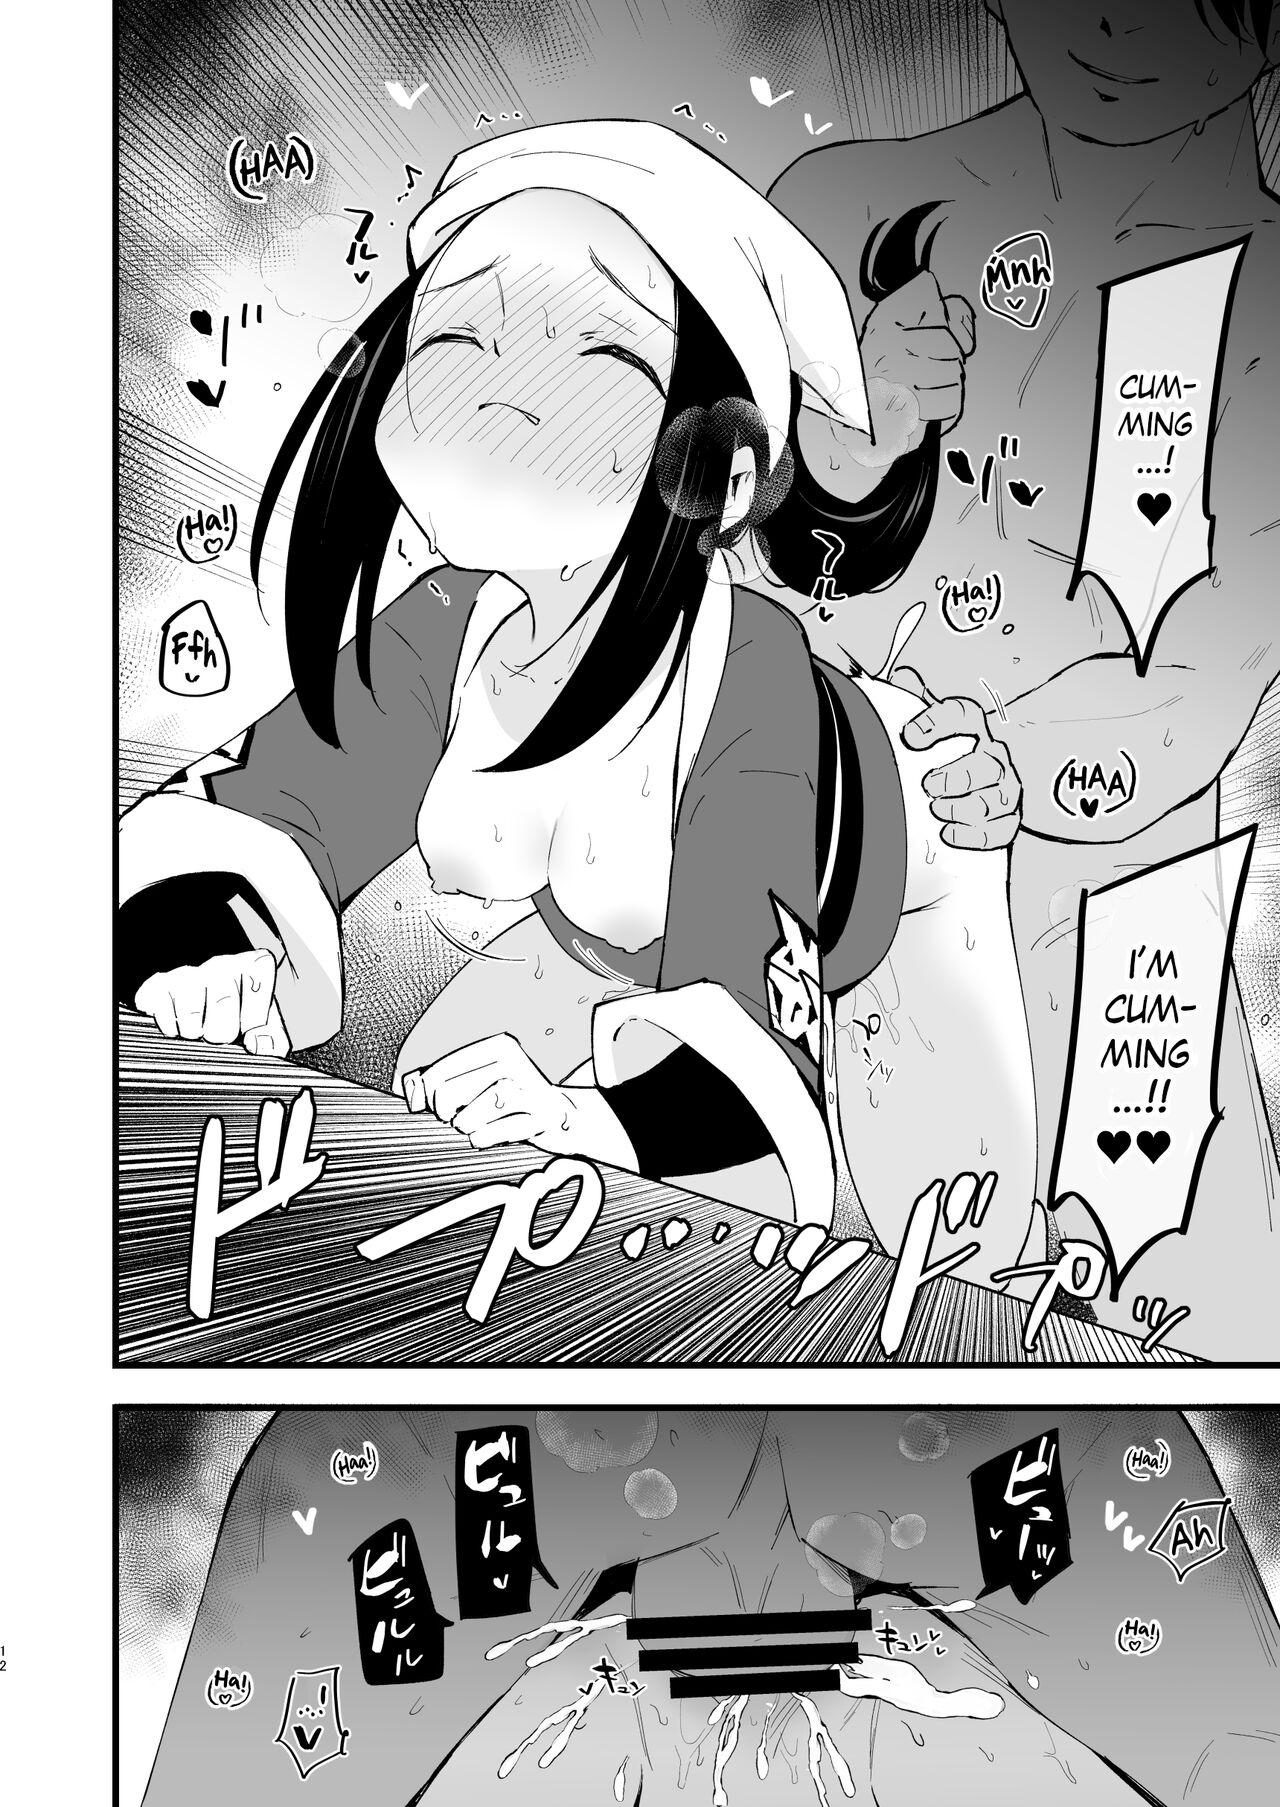 Fucking Pussy Hisui Tensei-roku | Records of my reincarnation in Hisui - Pokemon | pocket monsters Fat Ass - Page 11